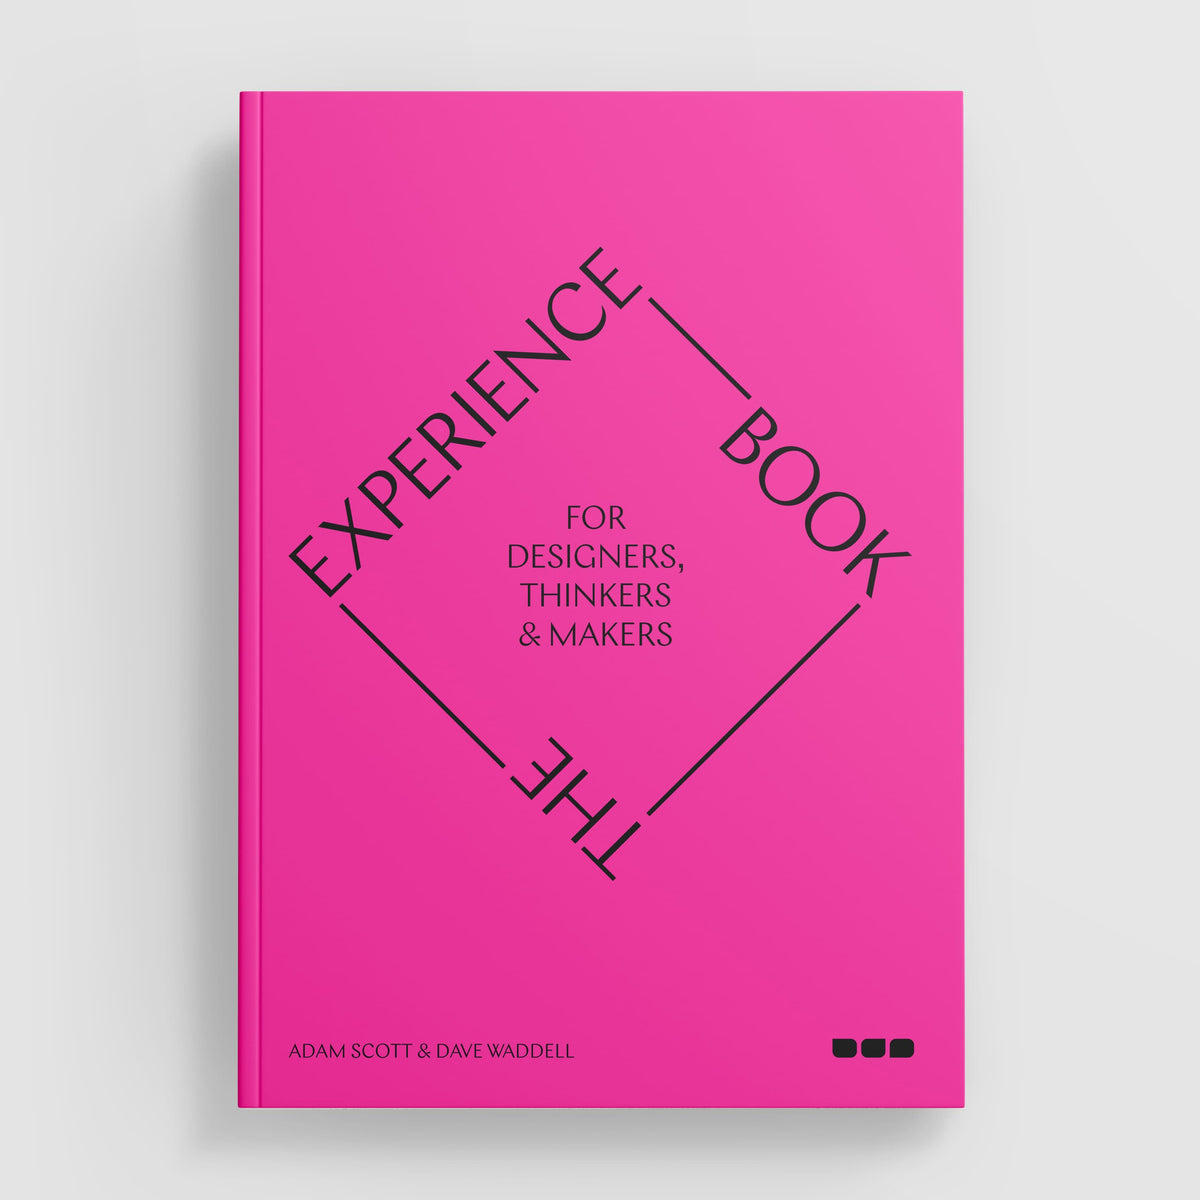 Bright pink book cover titled "The Experience Book: For Designers, Thinkers & Makers" by Adam Scott and Dave Waddell. The title, arranged in a diamond shape, delves into design theory tailored for experience designers. Published by Black Dog Online.